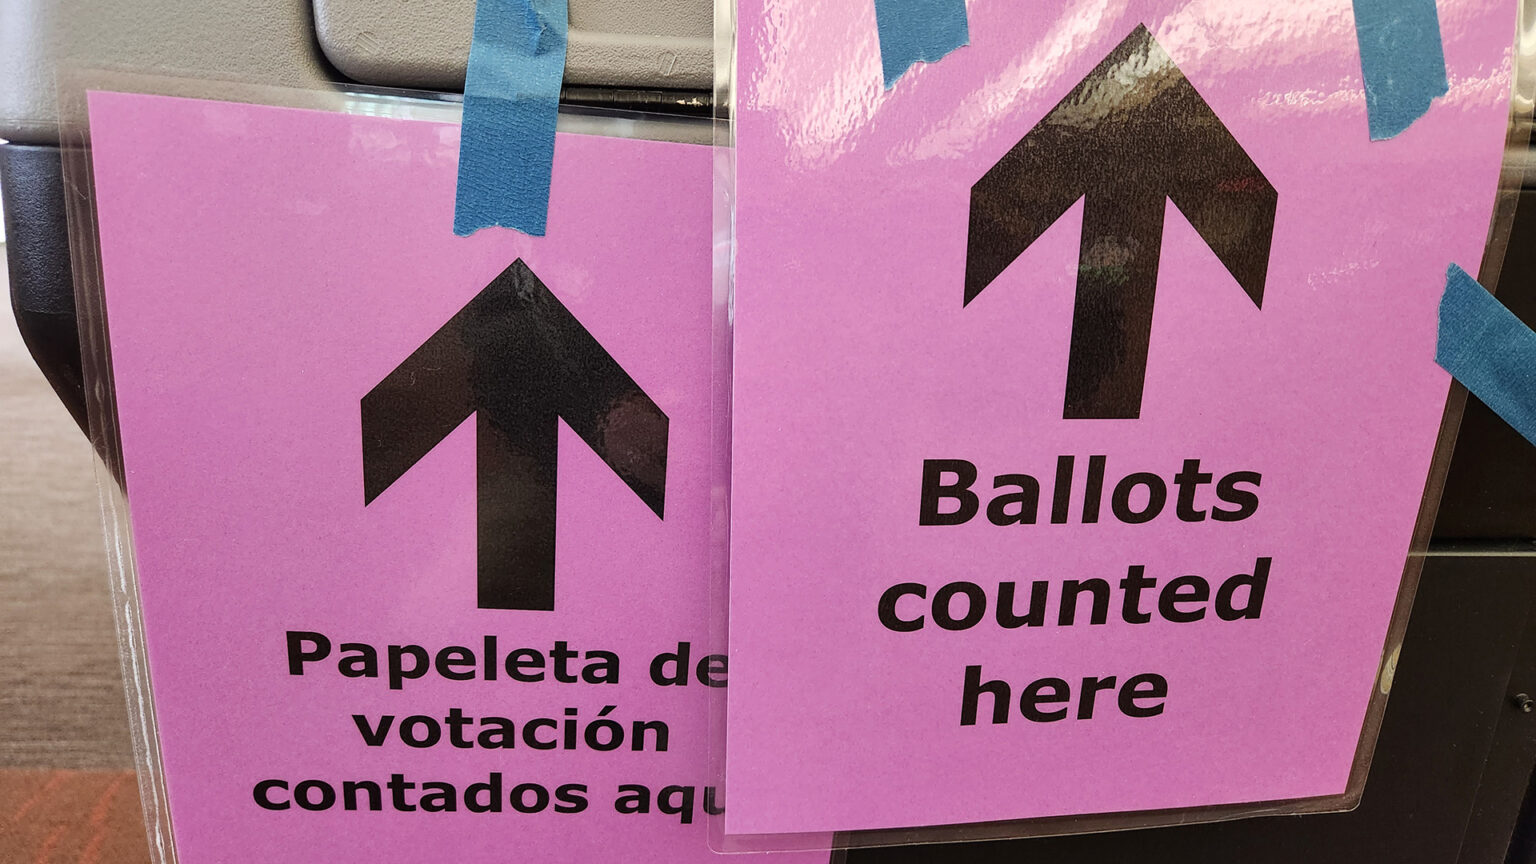 Two laminated signs with arrows pointing up read Papeleta de votación contados aqui and Ballots counted here are attached with painter's tape to the side of a ballot tabulator machine.